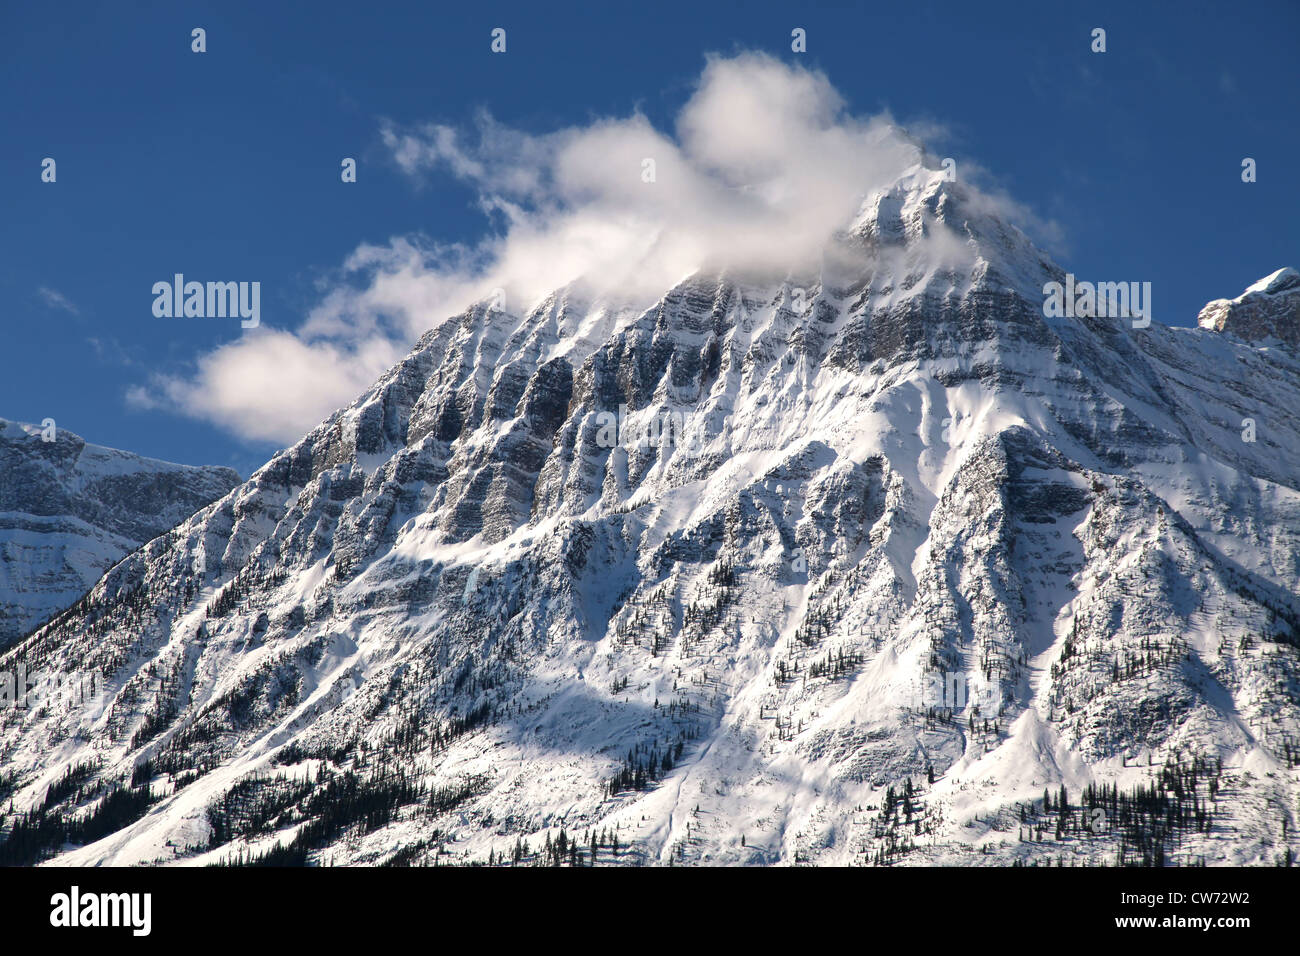 A snow capped mountain in winter, part of the Rocky Mountain range, in Jasper National Park, Alberta, Canada. Stock Photo